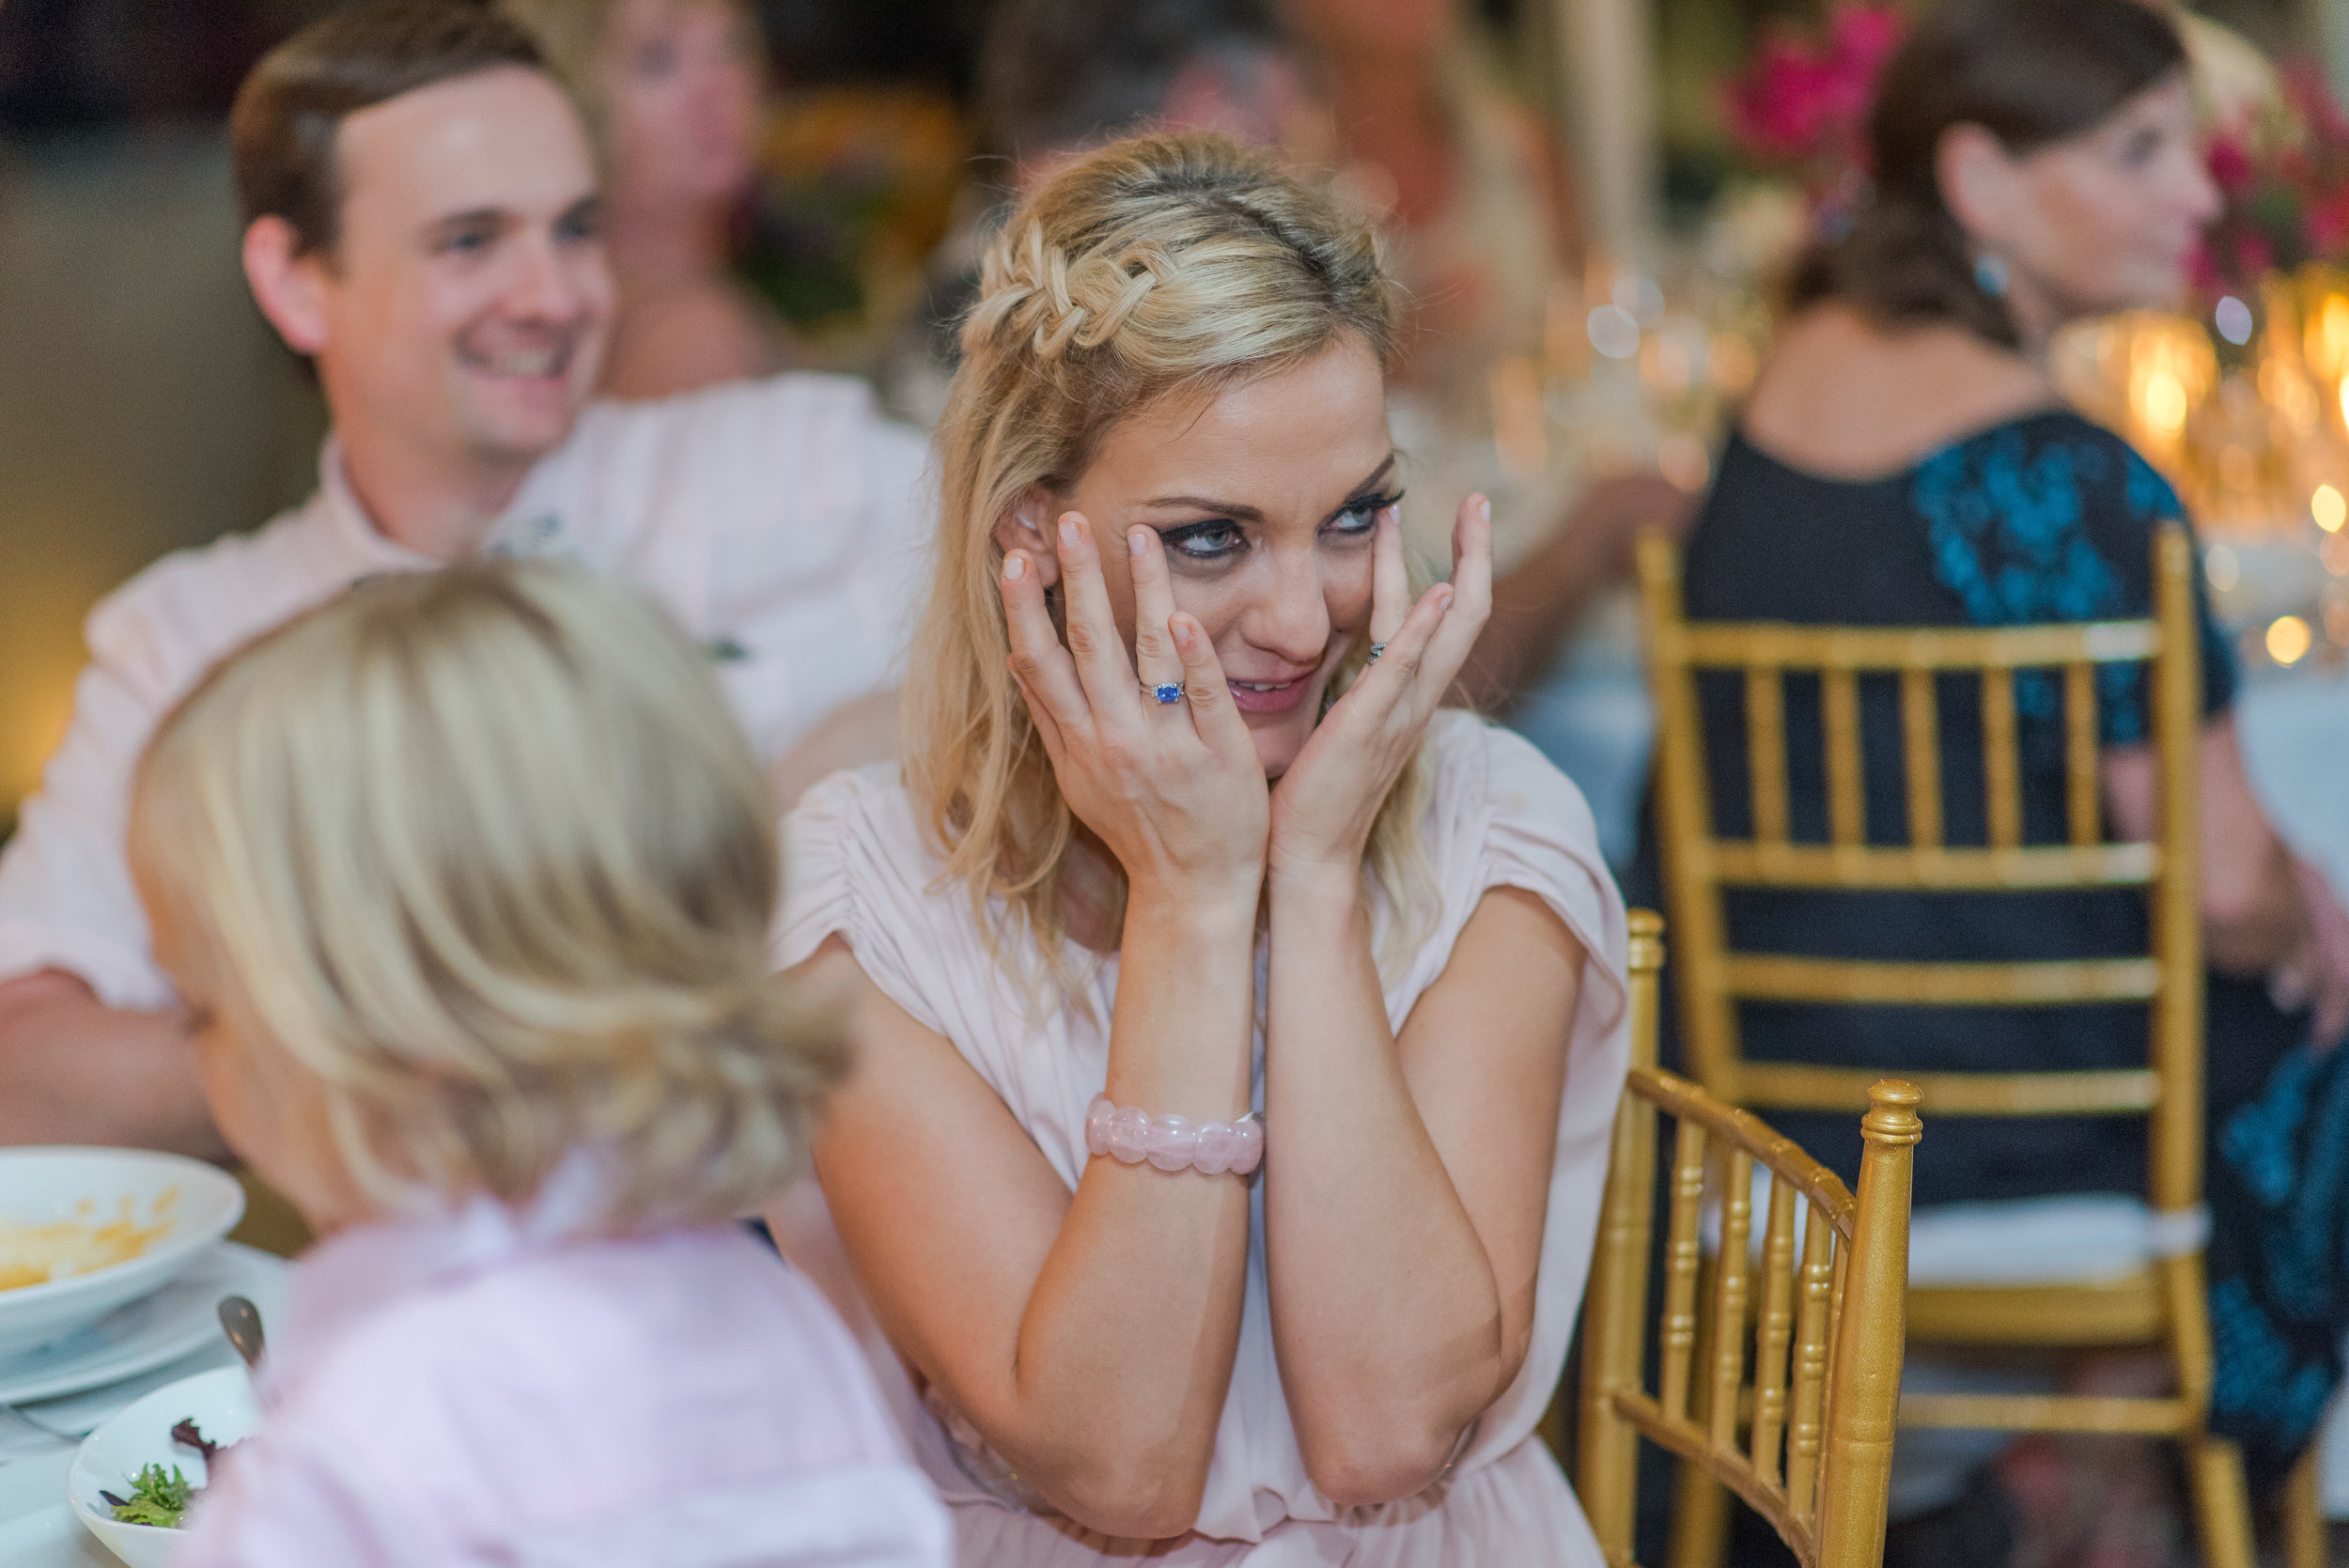 Sister of the bride crying during her first dance at the reception